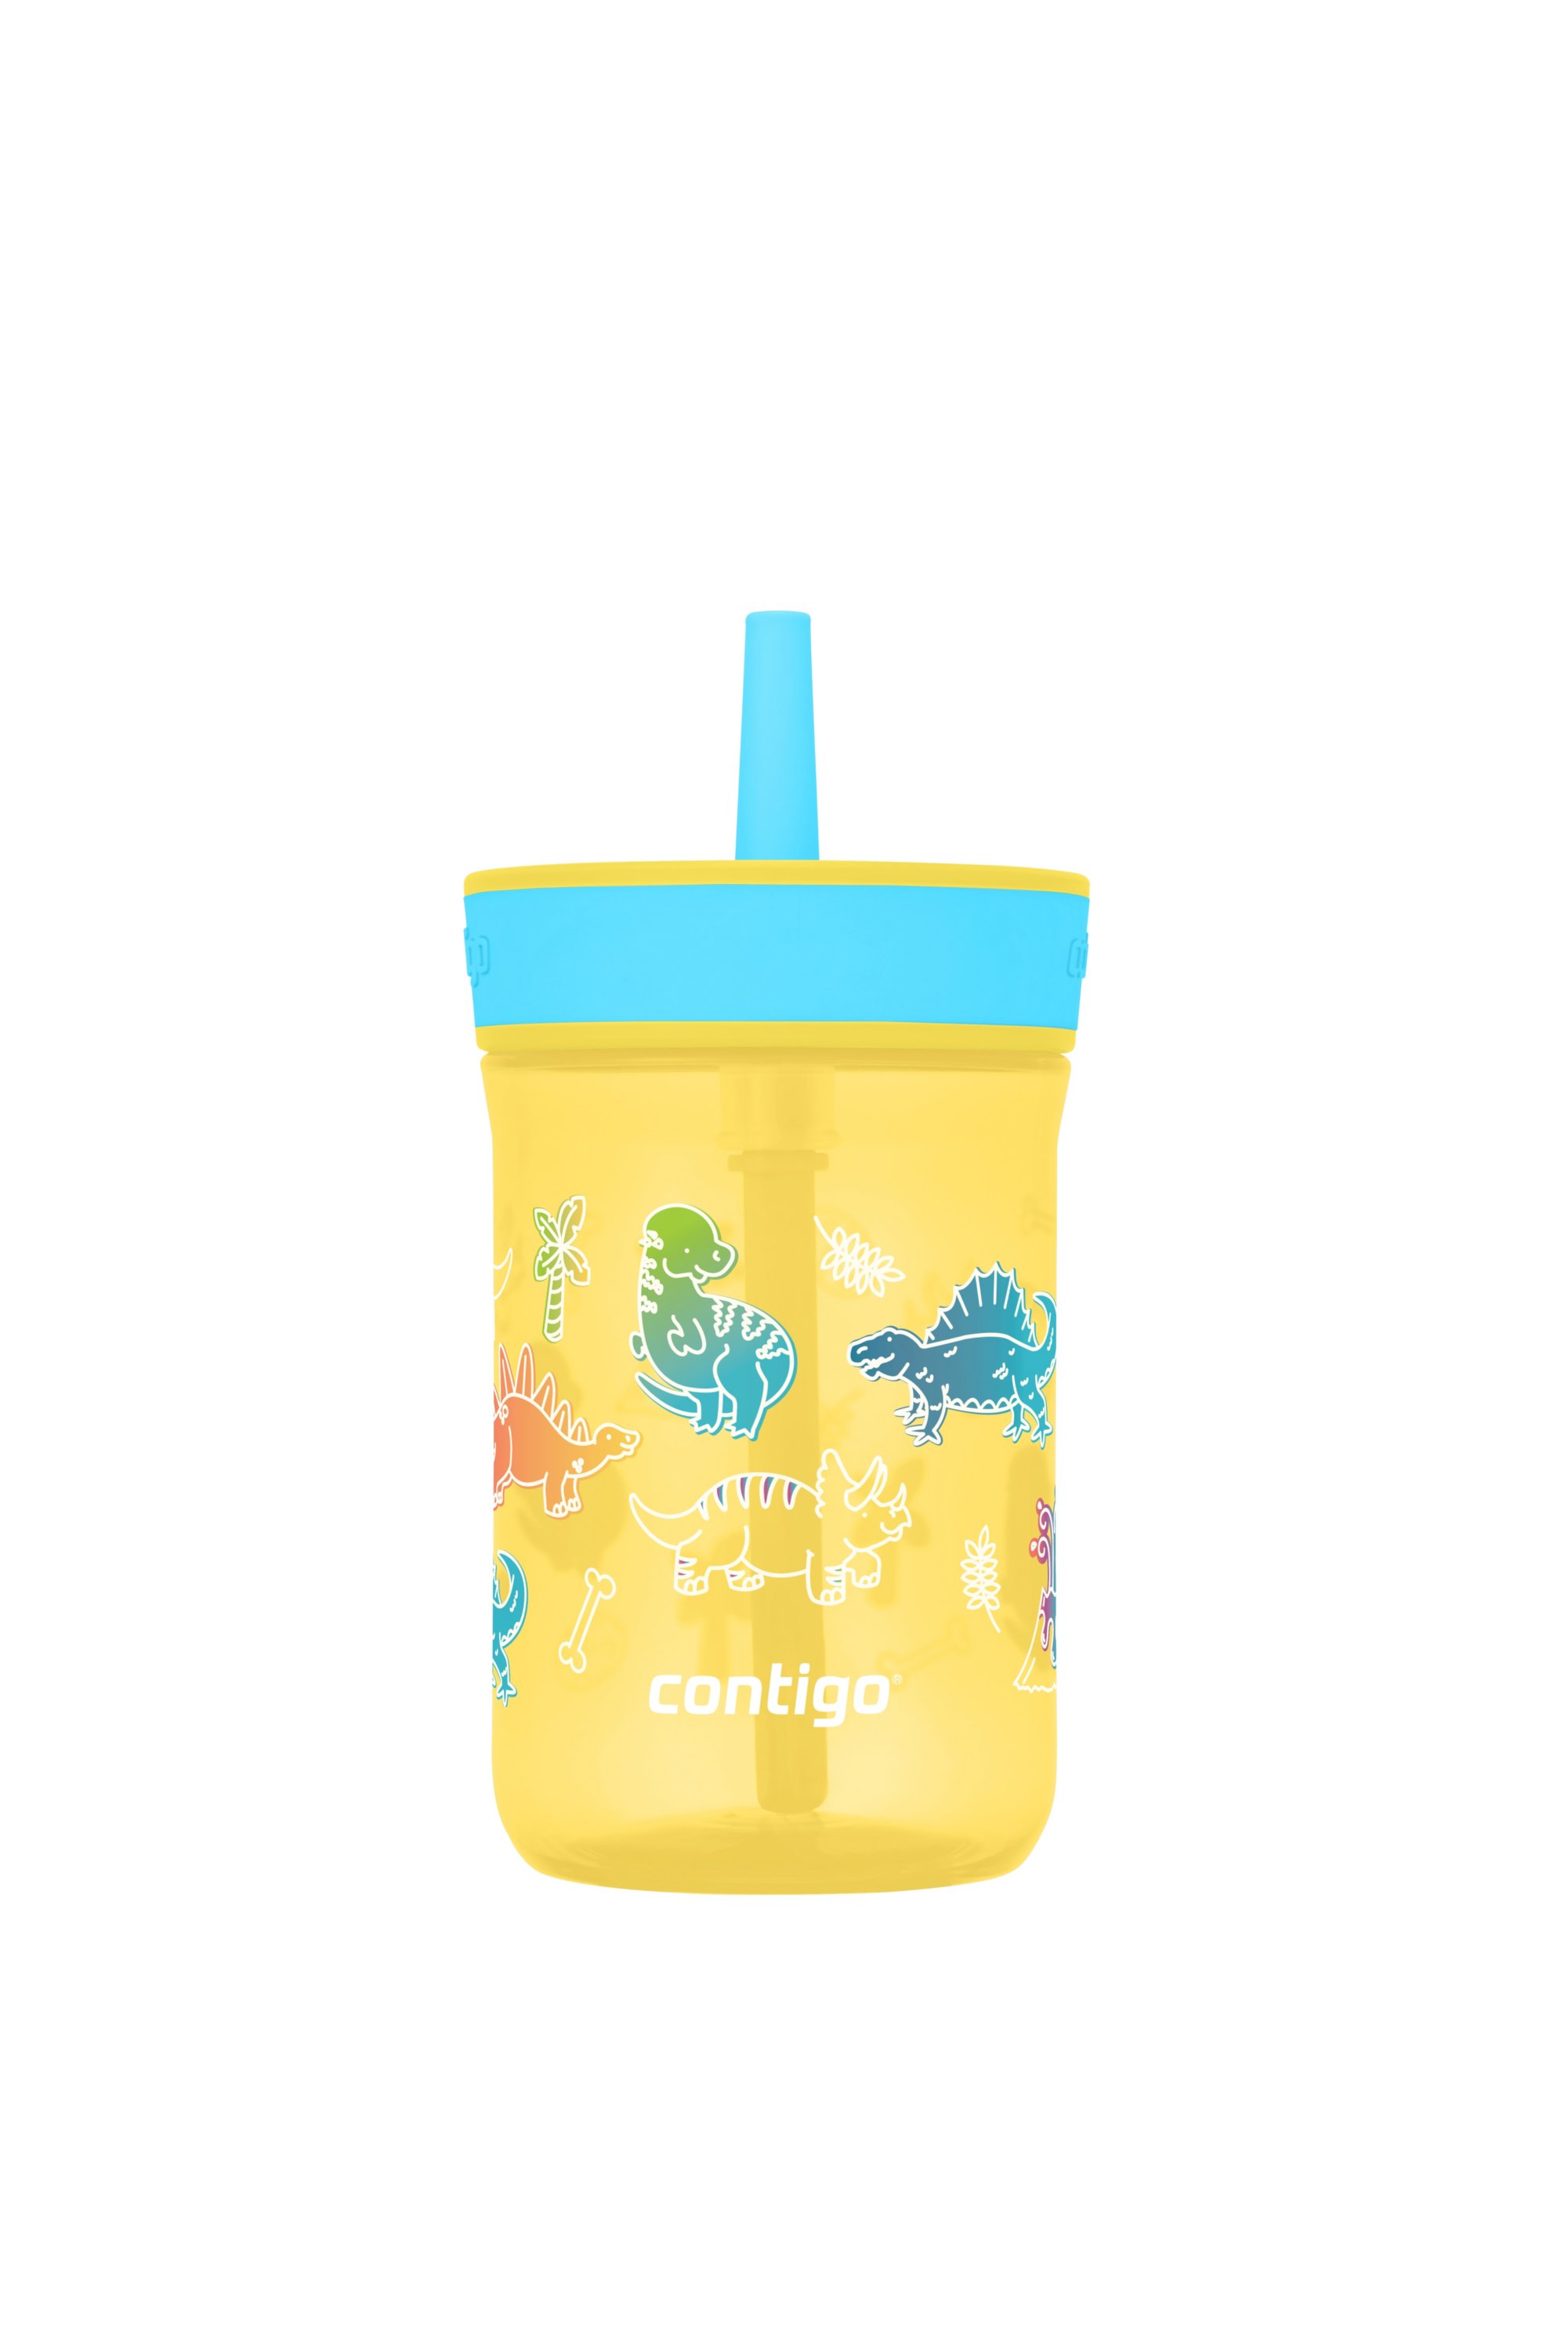 Contigo Leighton Kids Plastic Water Bottle, 14oz Spill-Proof Tumbler with  Straw for Kids, Dishwasher Safe, Coral/Grape